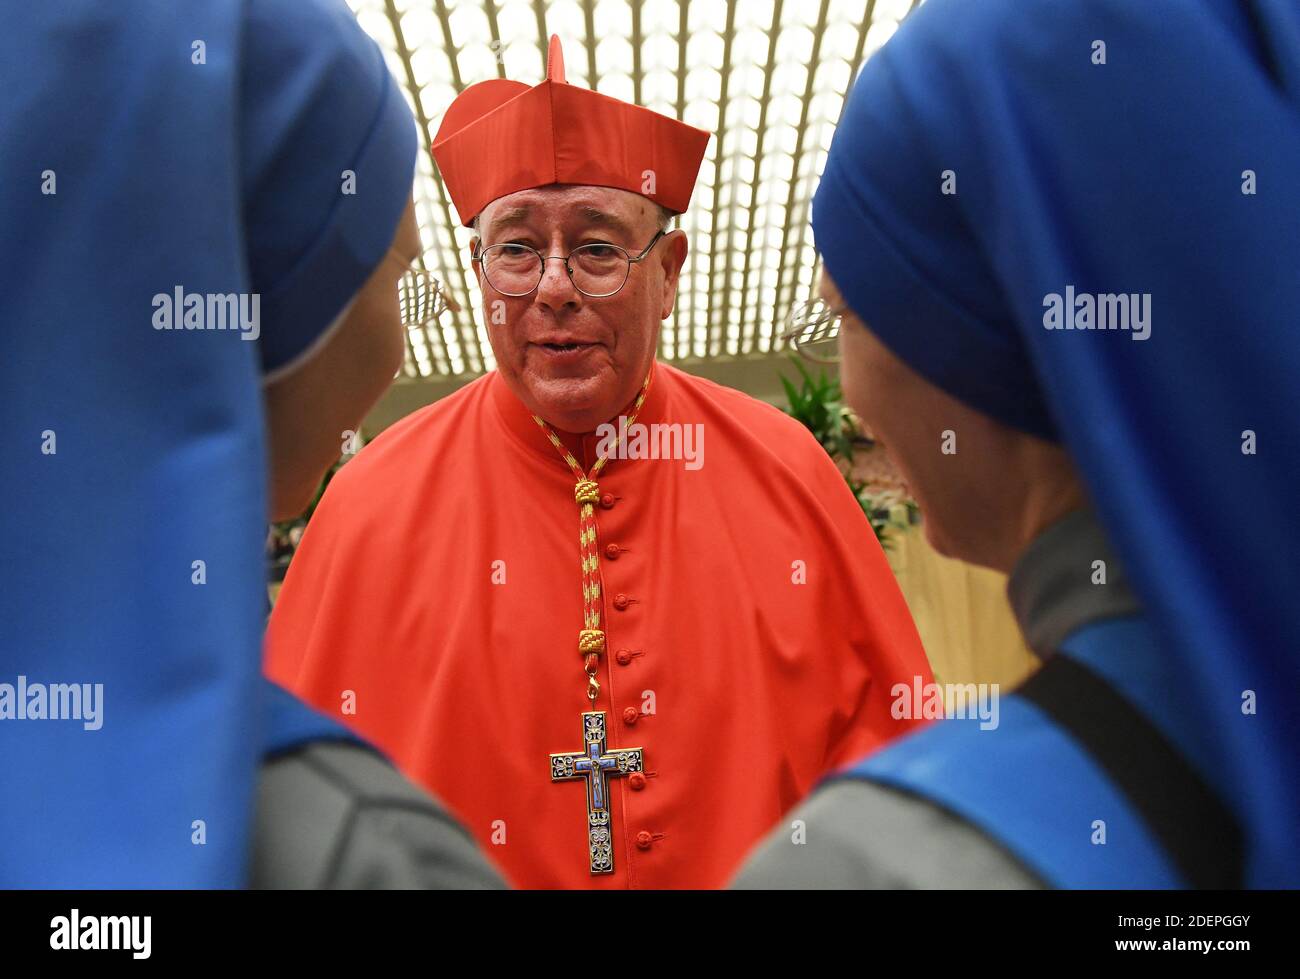 New cardinal Jean-Claude Hollerich (Luxembourg) poses as he meets with  relatives and friends during a courtesy visit following his appointment by  the Pope Francis, during a Consistory ceremony for the creation of